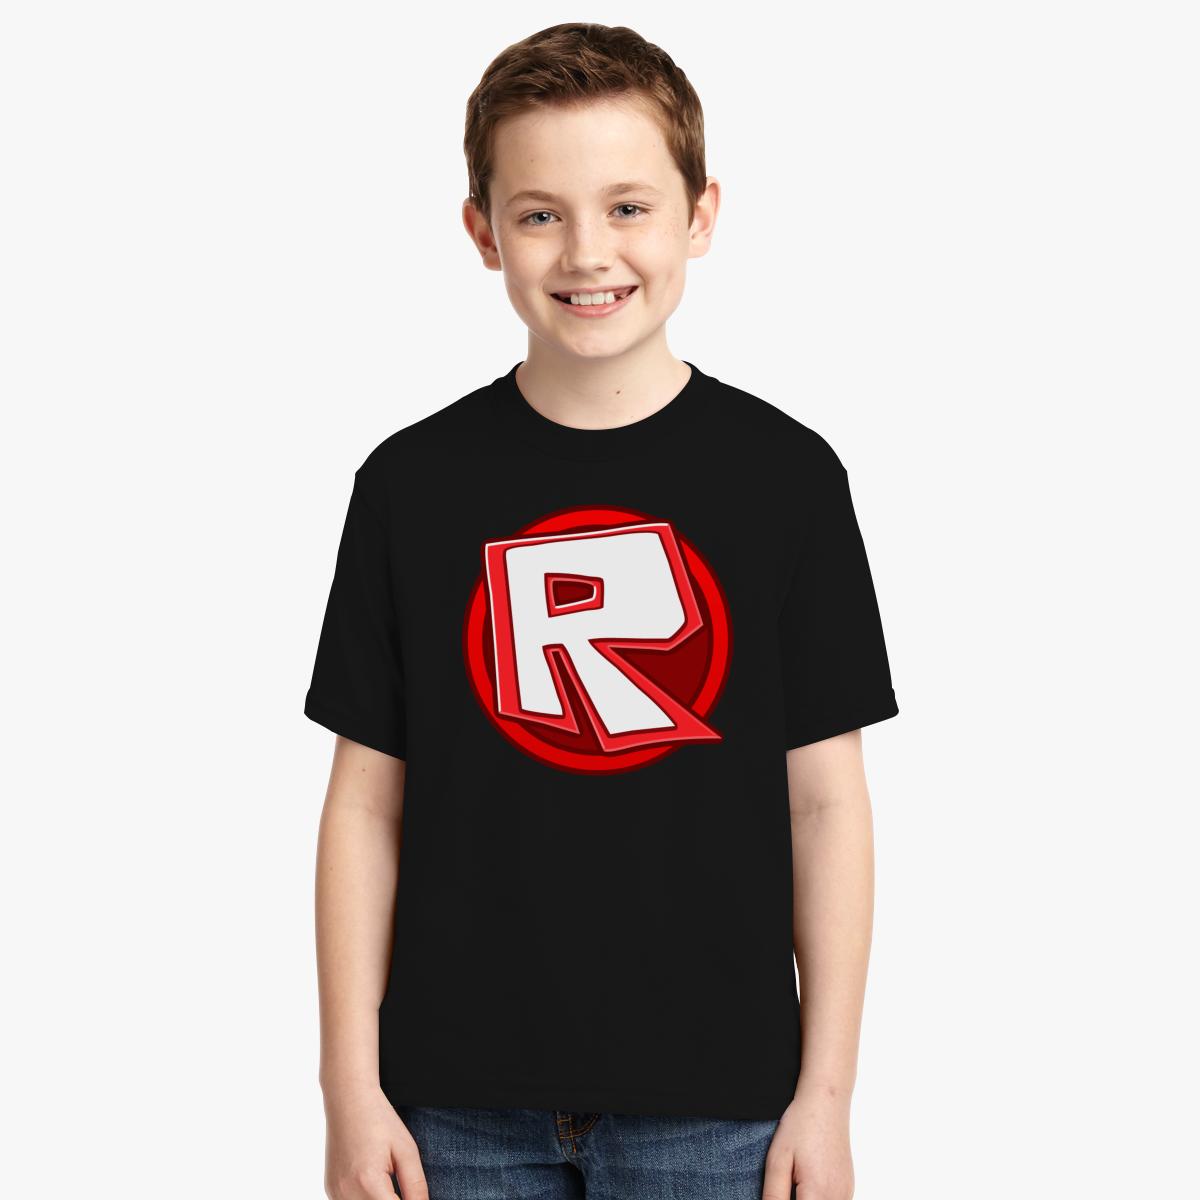 Make Your Own Shirt On Roblox Dreamworks